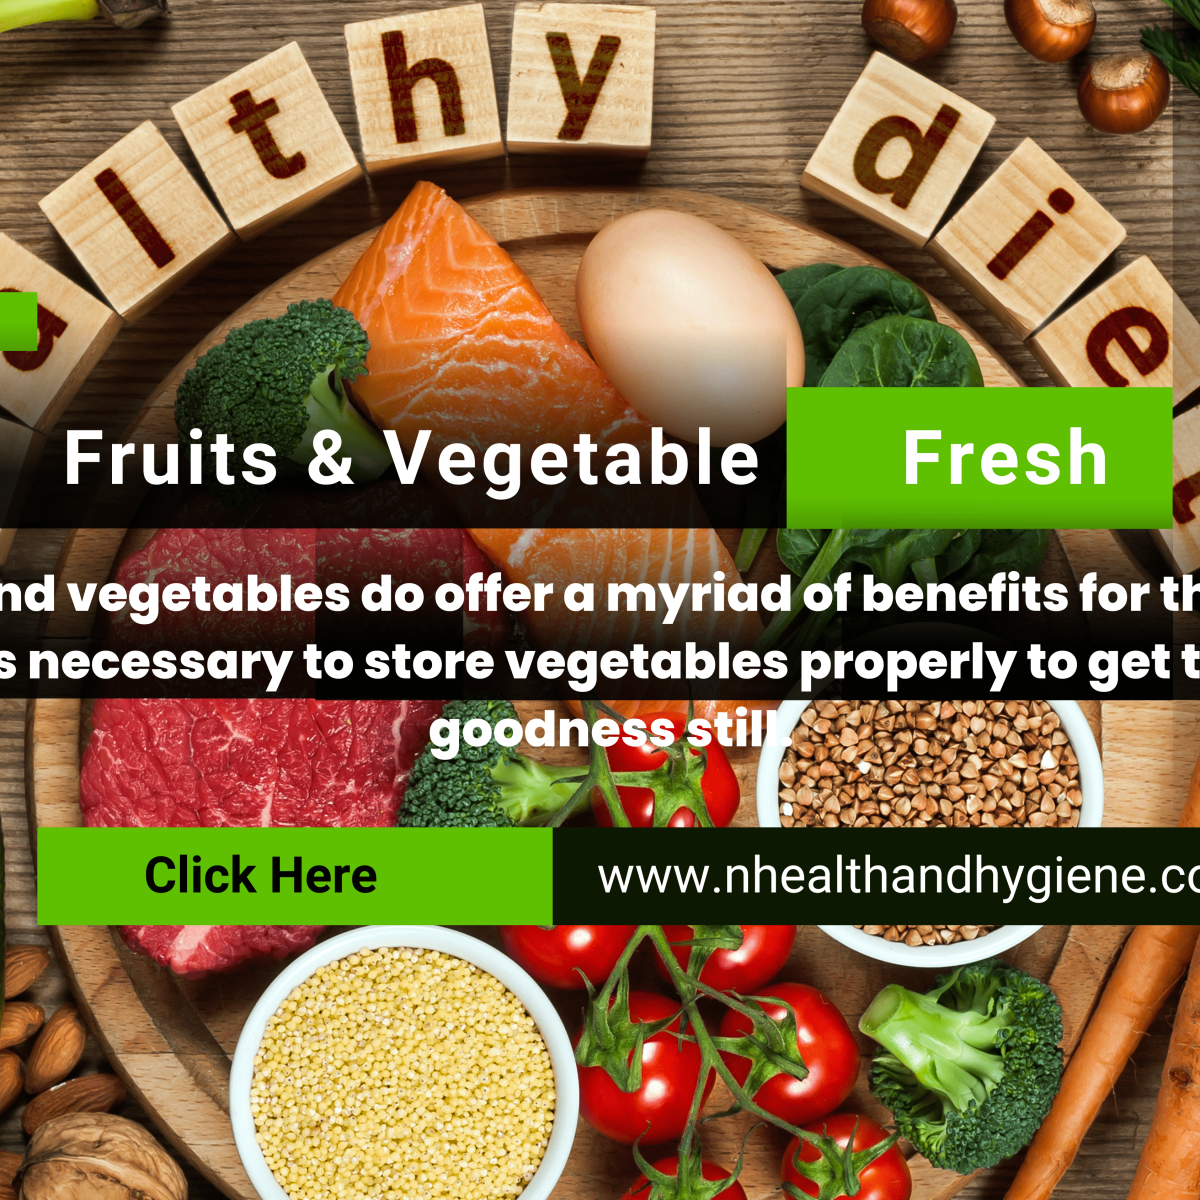 Healthy dietary tips and guidelines